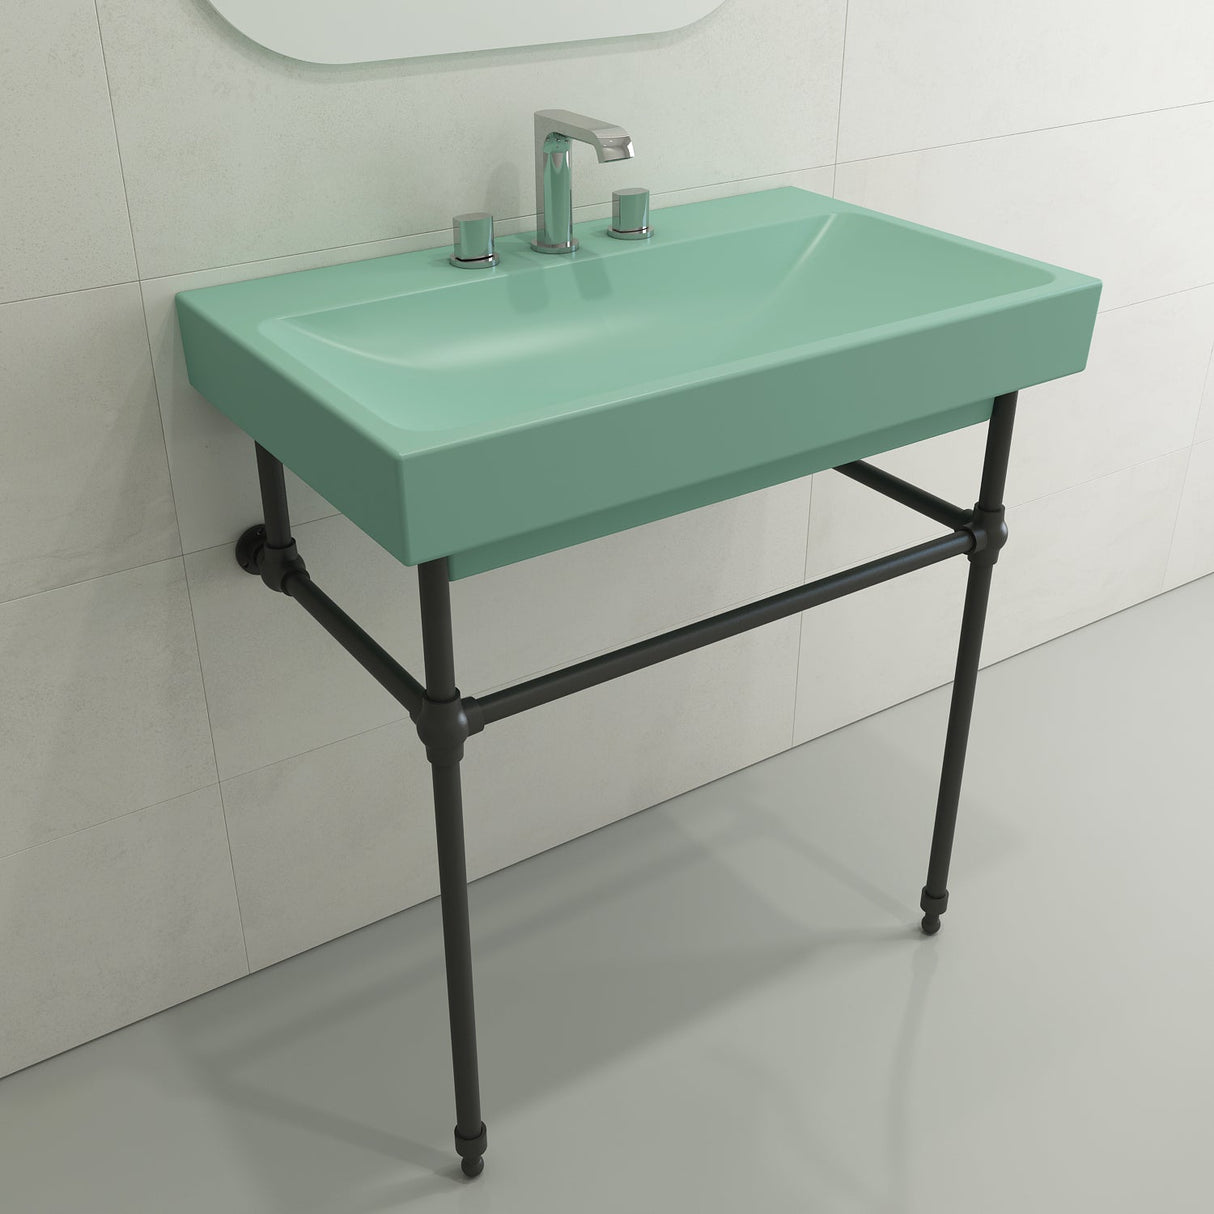 BOCCHI 1078-033-0127 Scala Arch Wall-Mounted Sink Fireclay 32 in. 3-Hole in Matte Mint Green